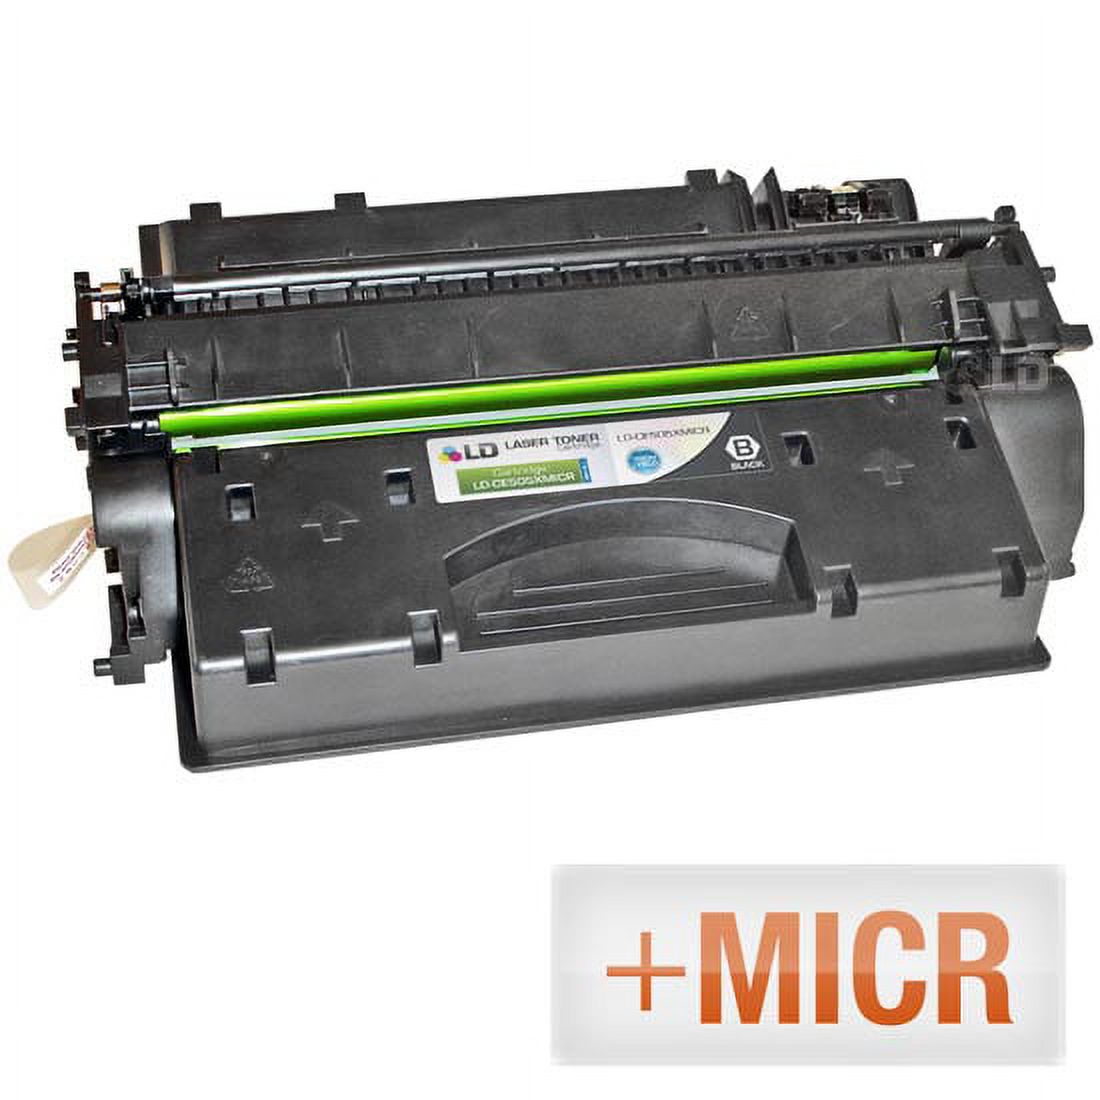 LD (MICR Toner) Remanufactured Replacement Laser Toner Cartridge for Hewlett Packard CE505X (HP 05X) High-Yield Black - image 1 of 1